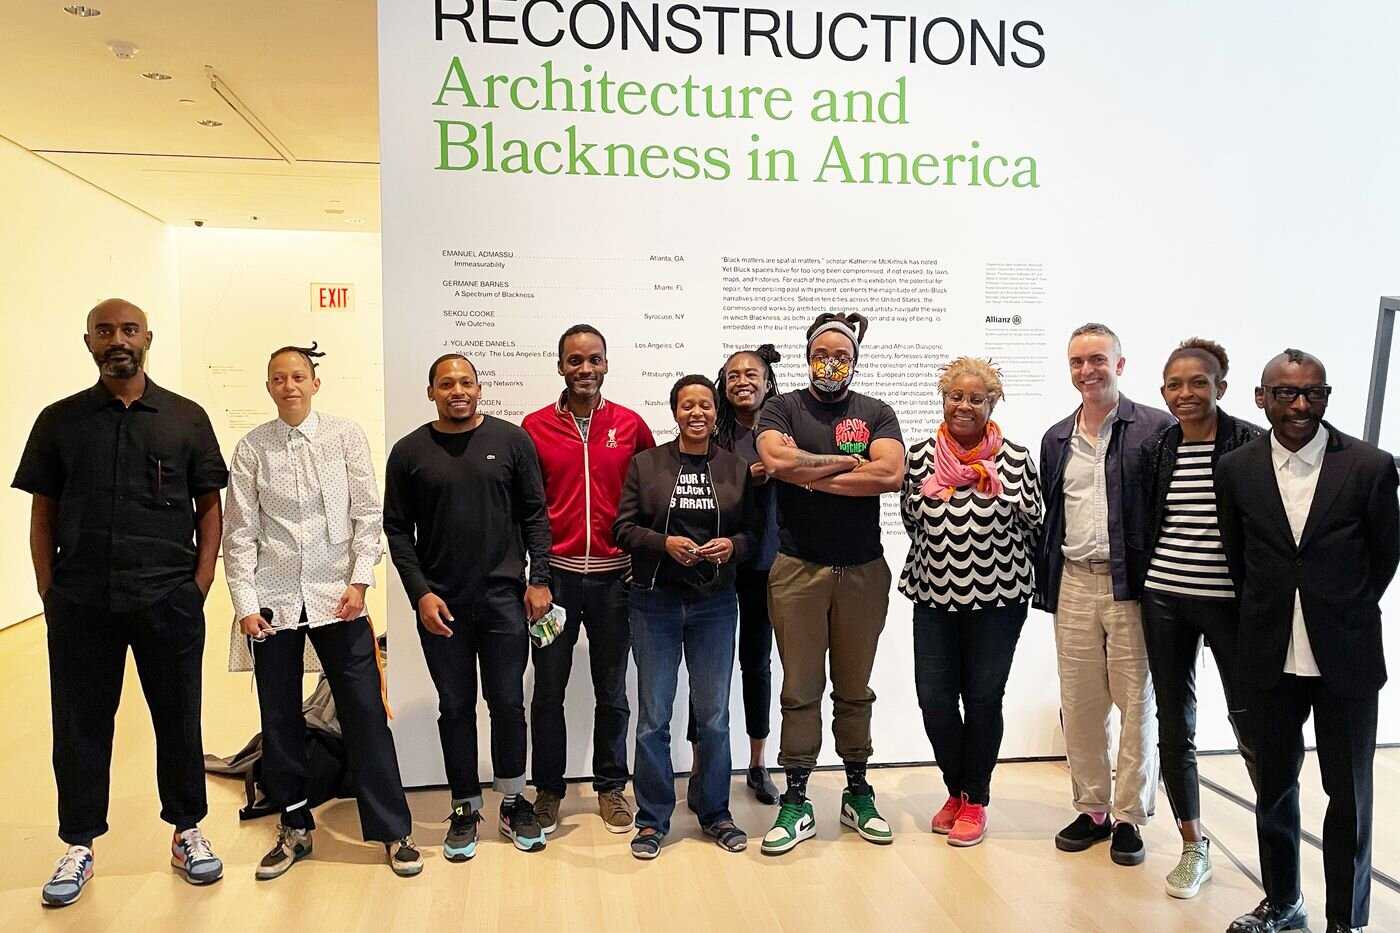 Members of the Black Reconstruction Collective stand outstide of an architecture exhibit, posing for a photo.